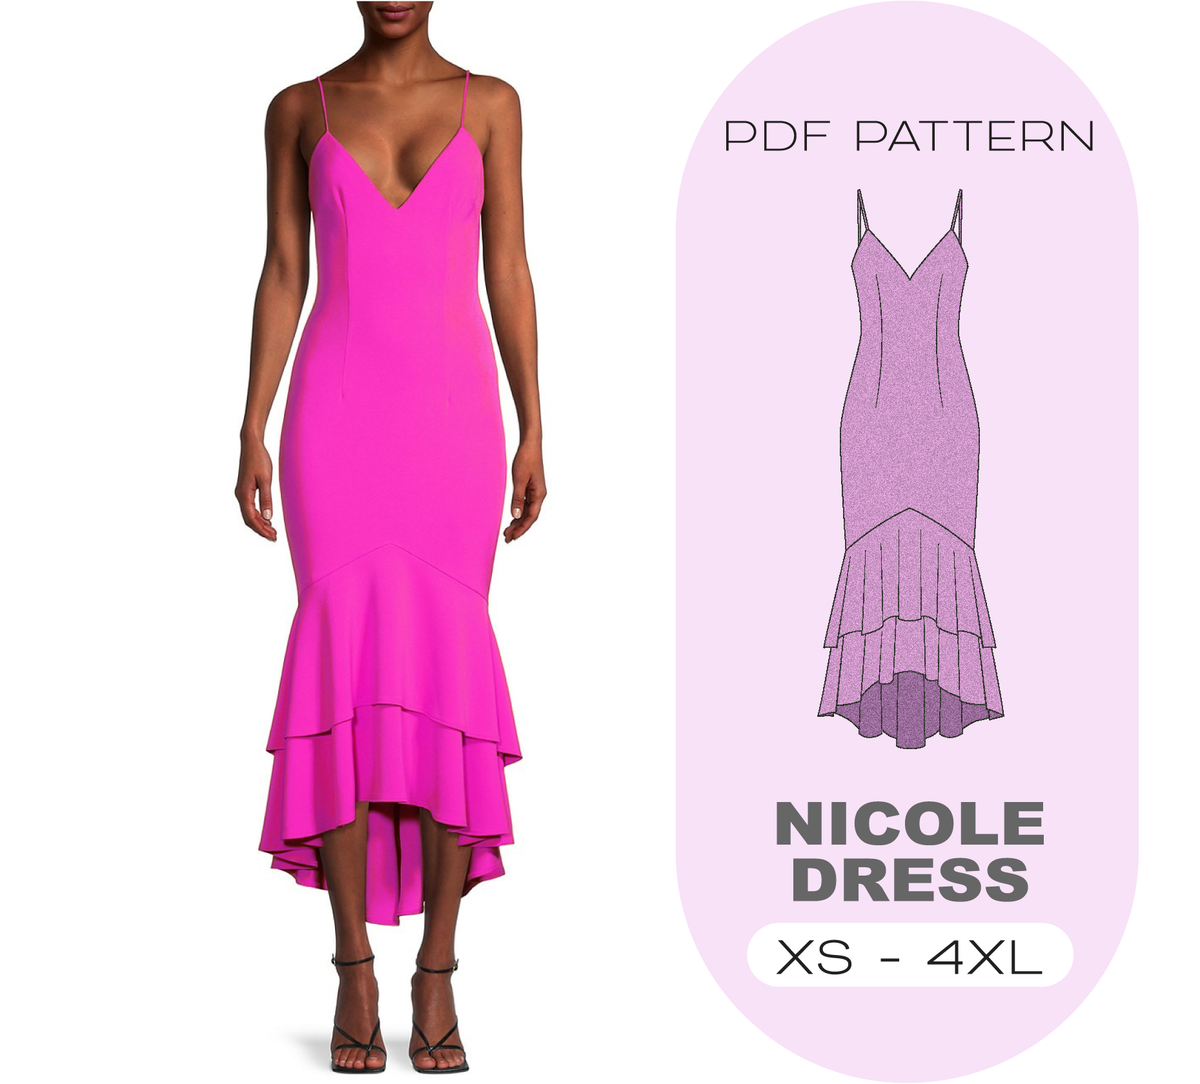 NICOLE Evening Dress PDF Sewing Pattern, 8 Sizes XS-4XL, Instant Download